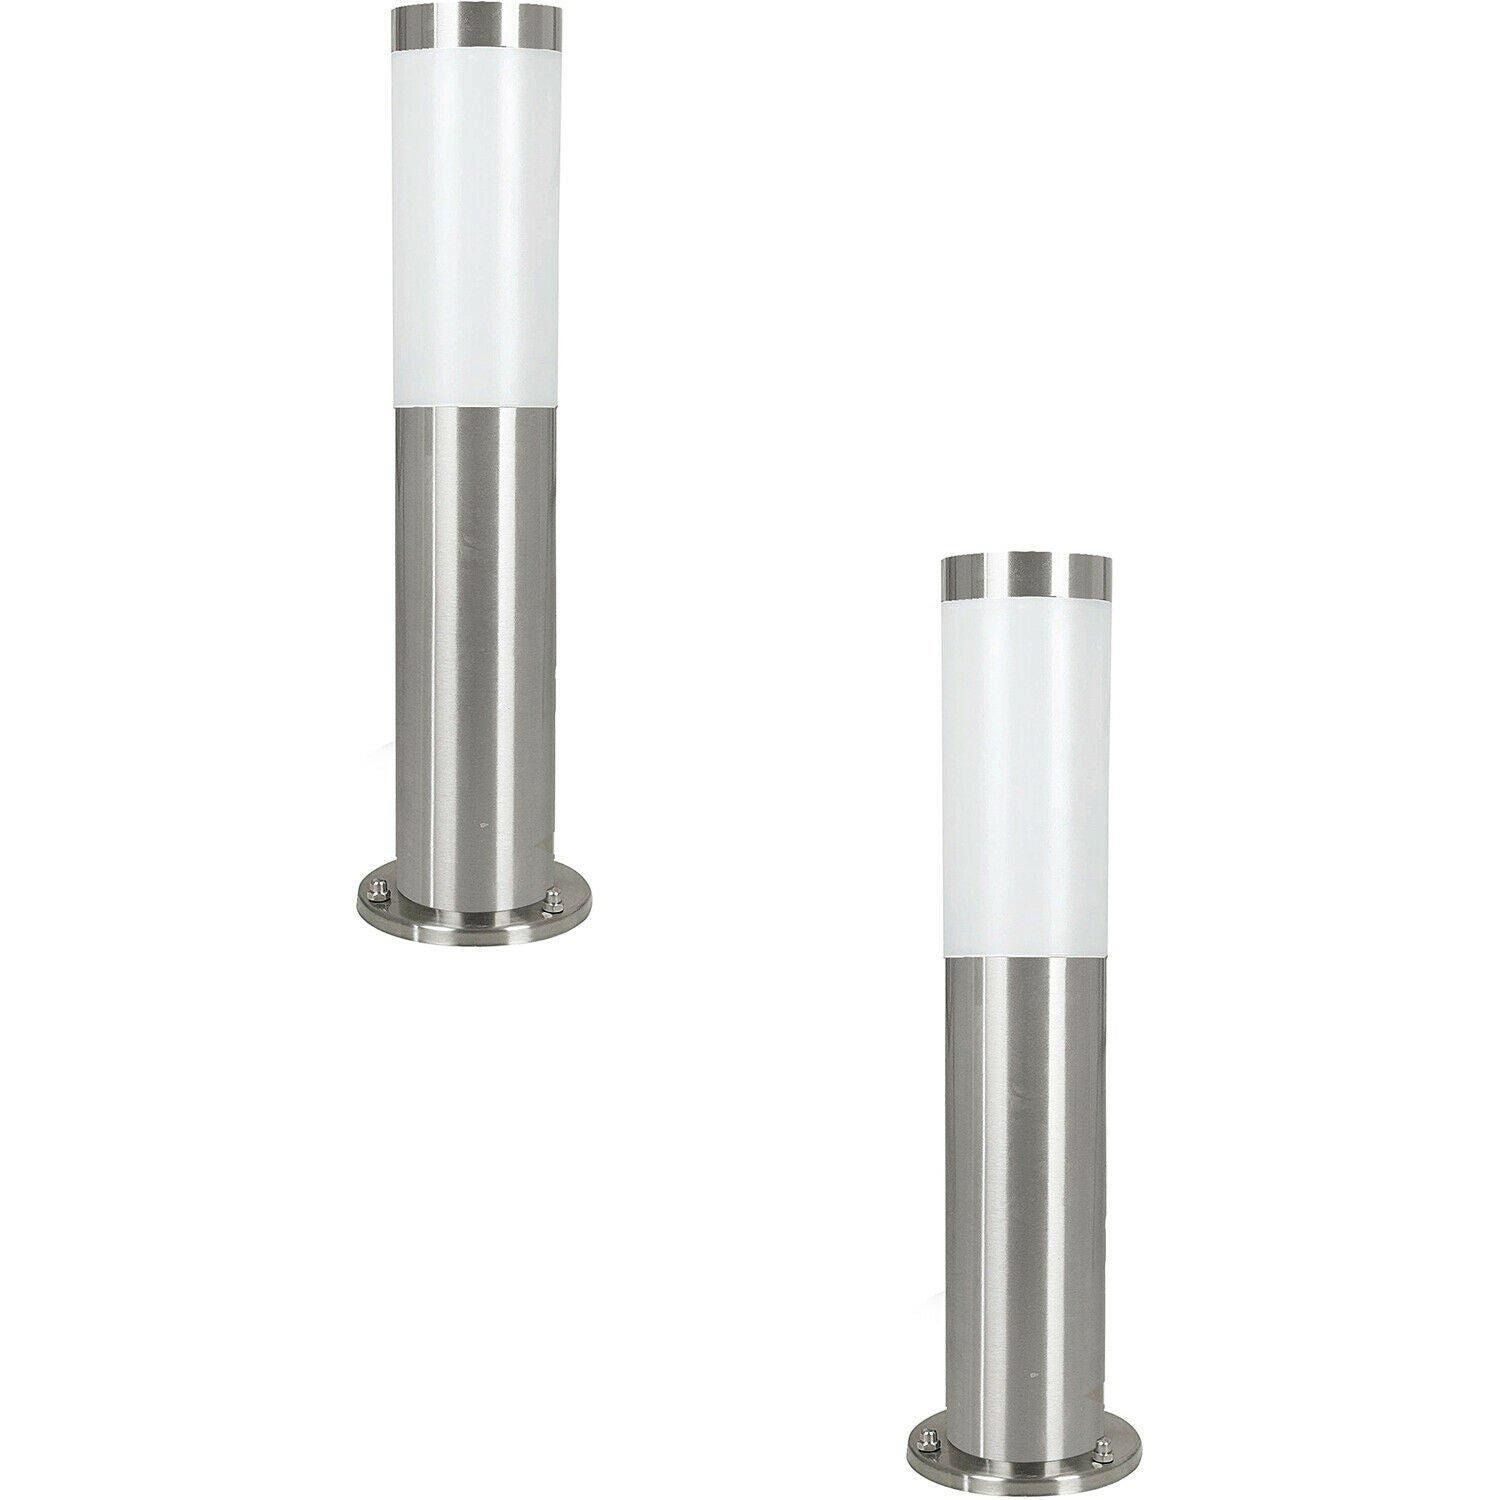 2 PACK IP44 Outdoor Bollard Light Stainless Steel 12W E27 450mm Driveway Post - image 1